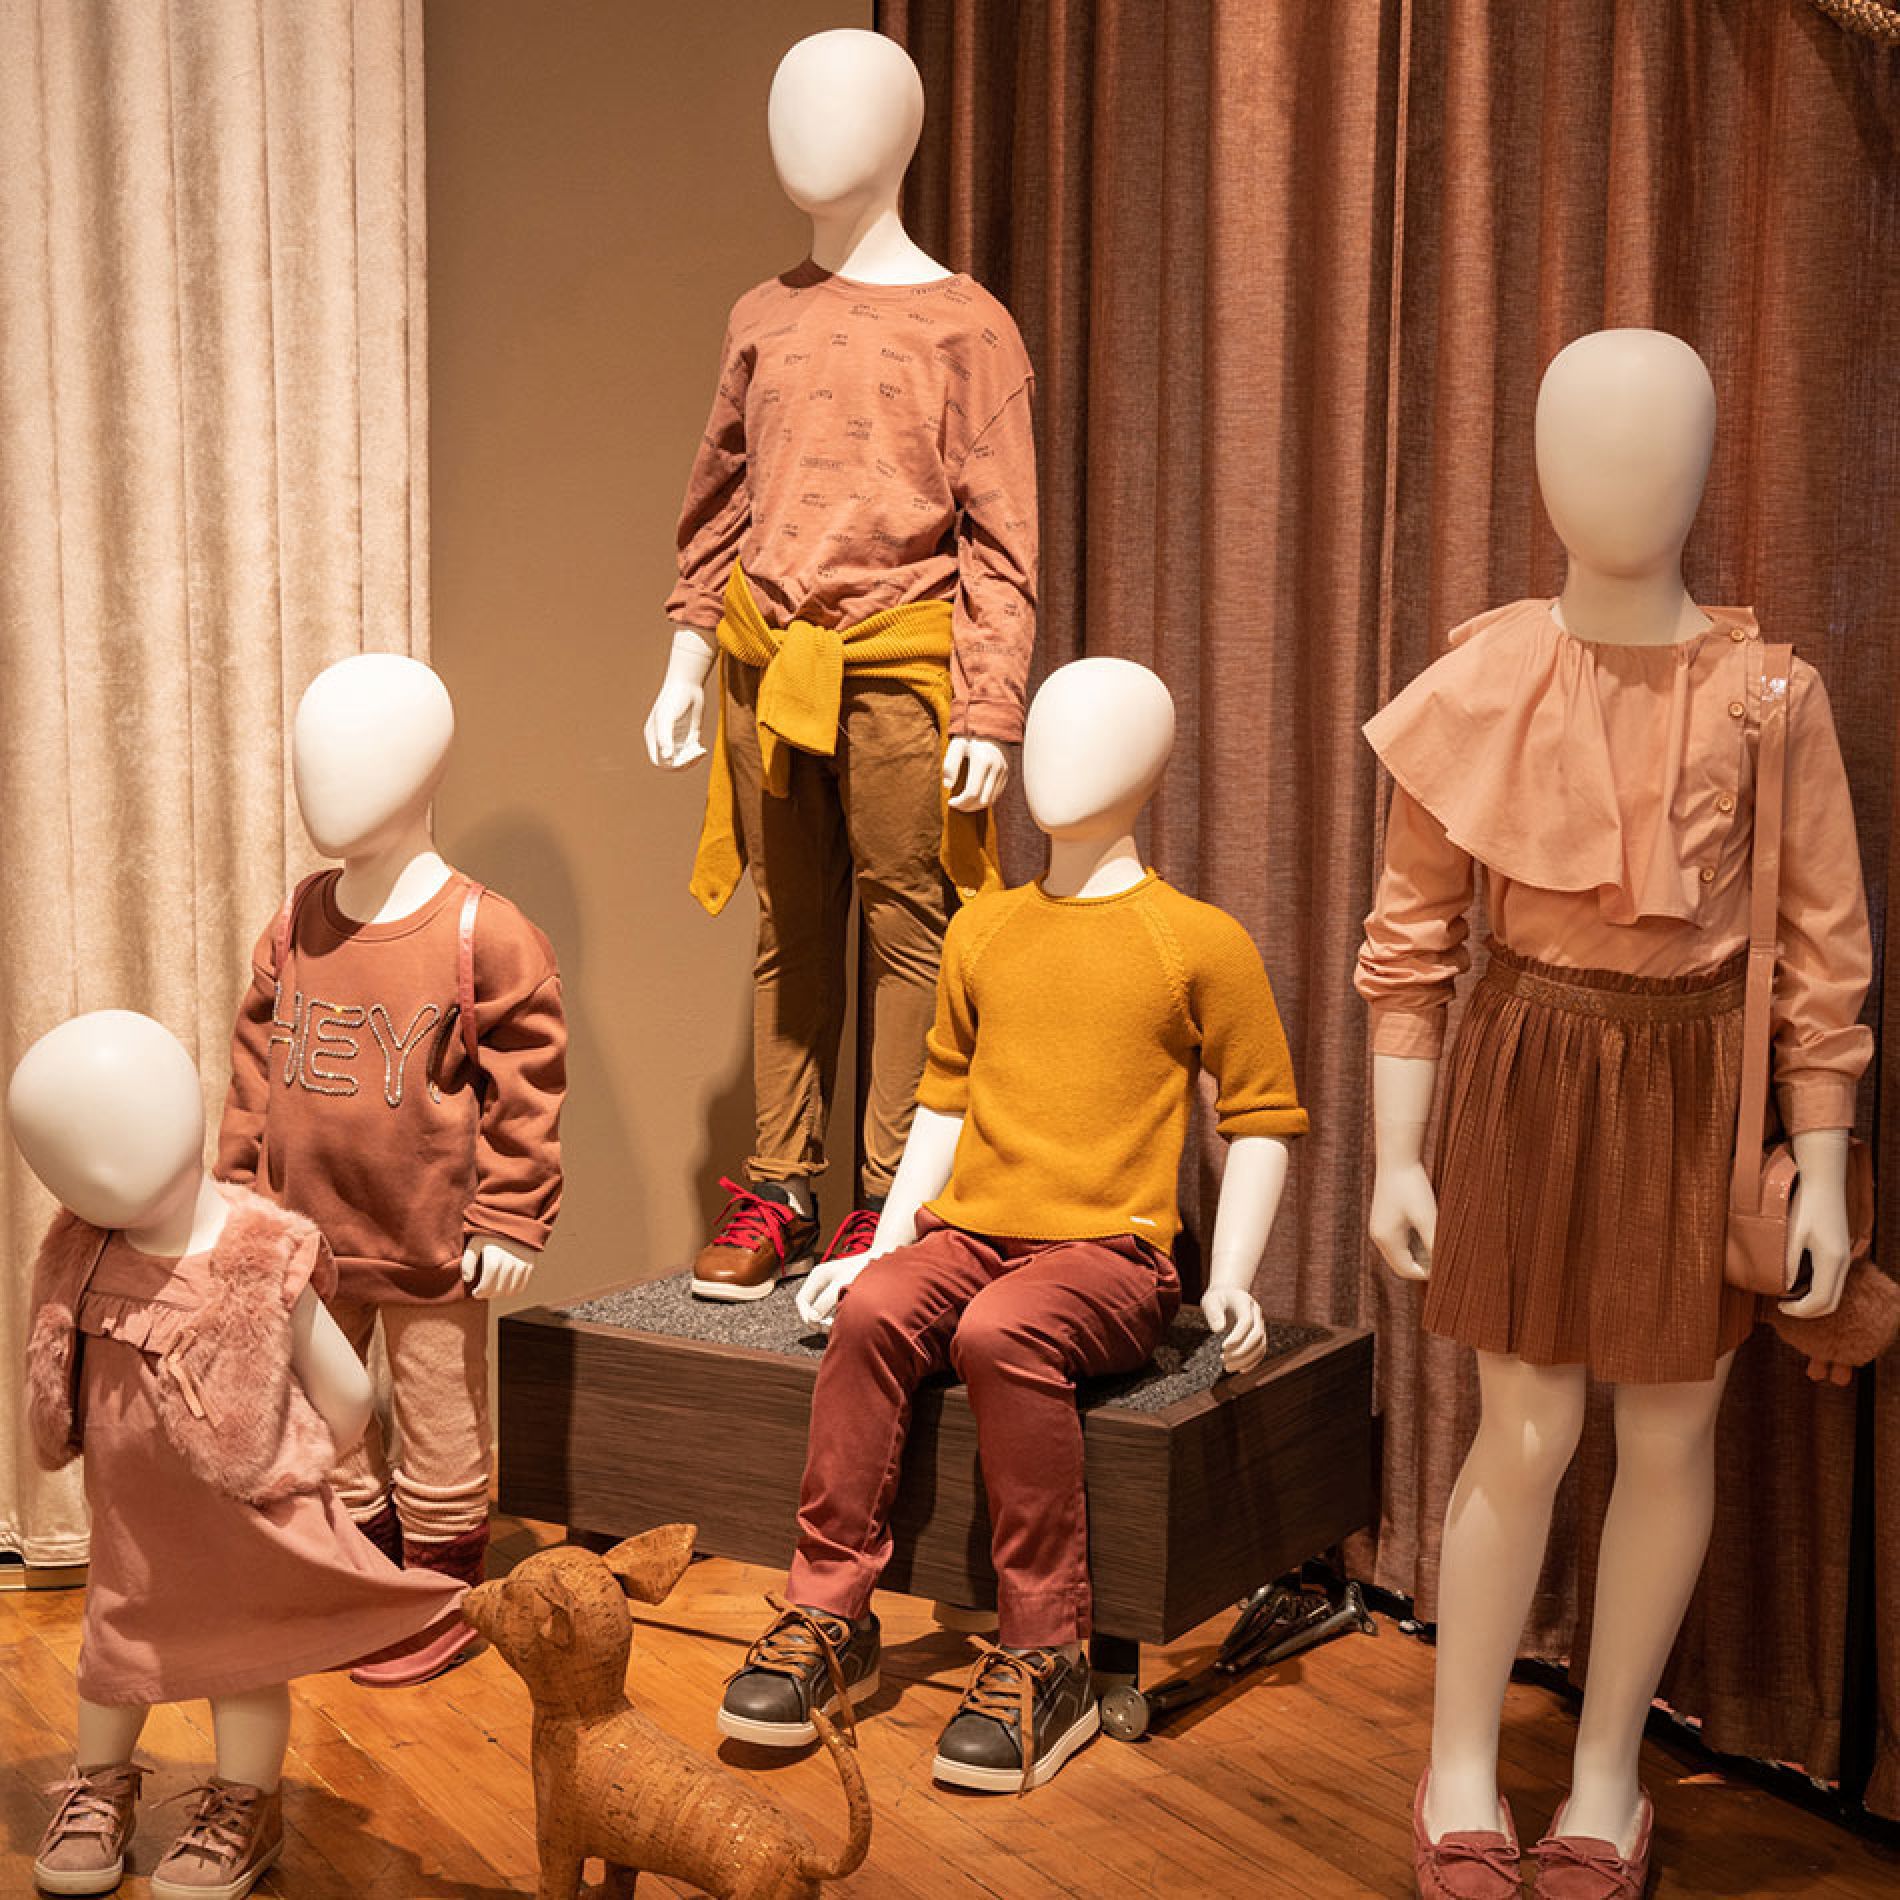 Female Mannequins Gallery Image